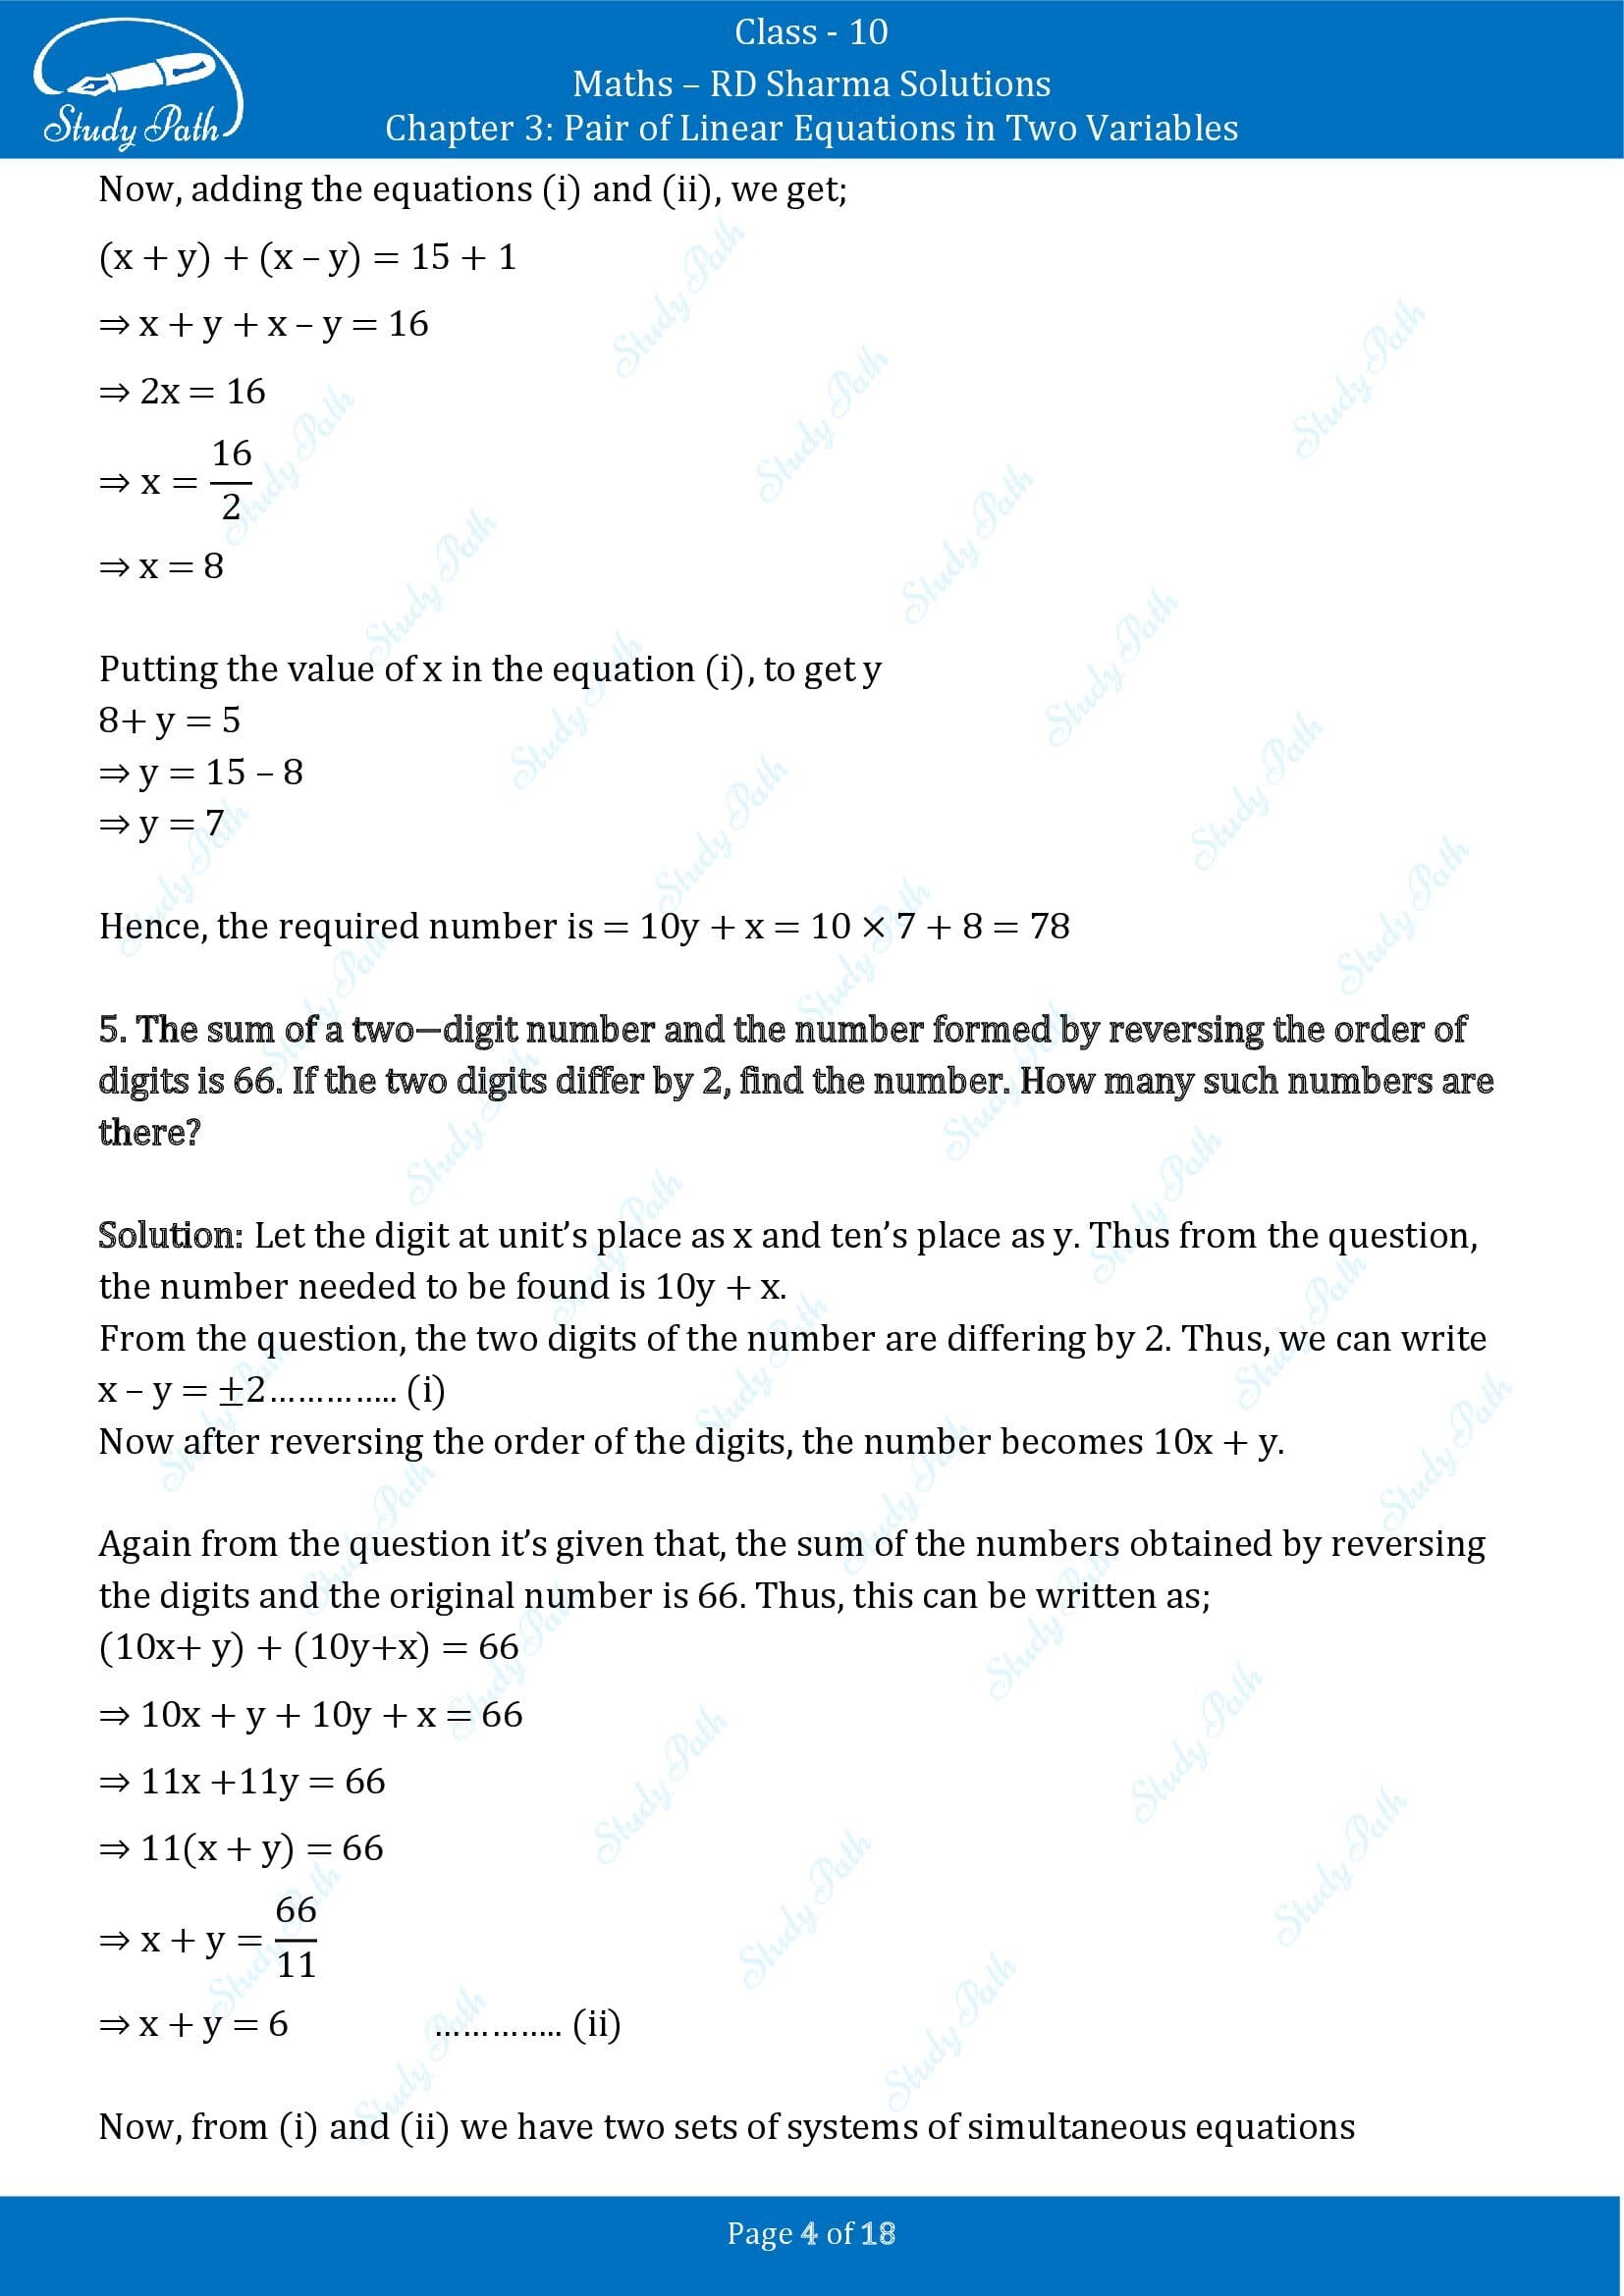 RD Sharma Solutions Class 10 Chapter 3 Pair of Linear Equations in Two Variables Exercise 3.7 00004